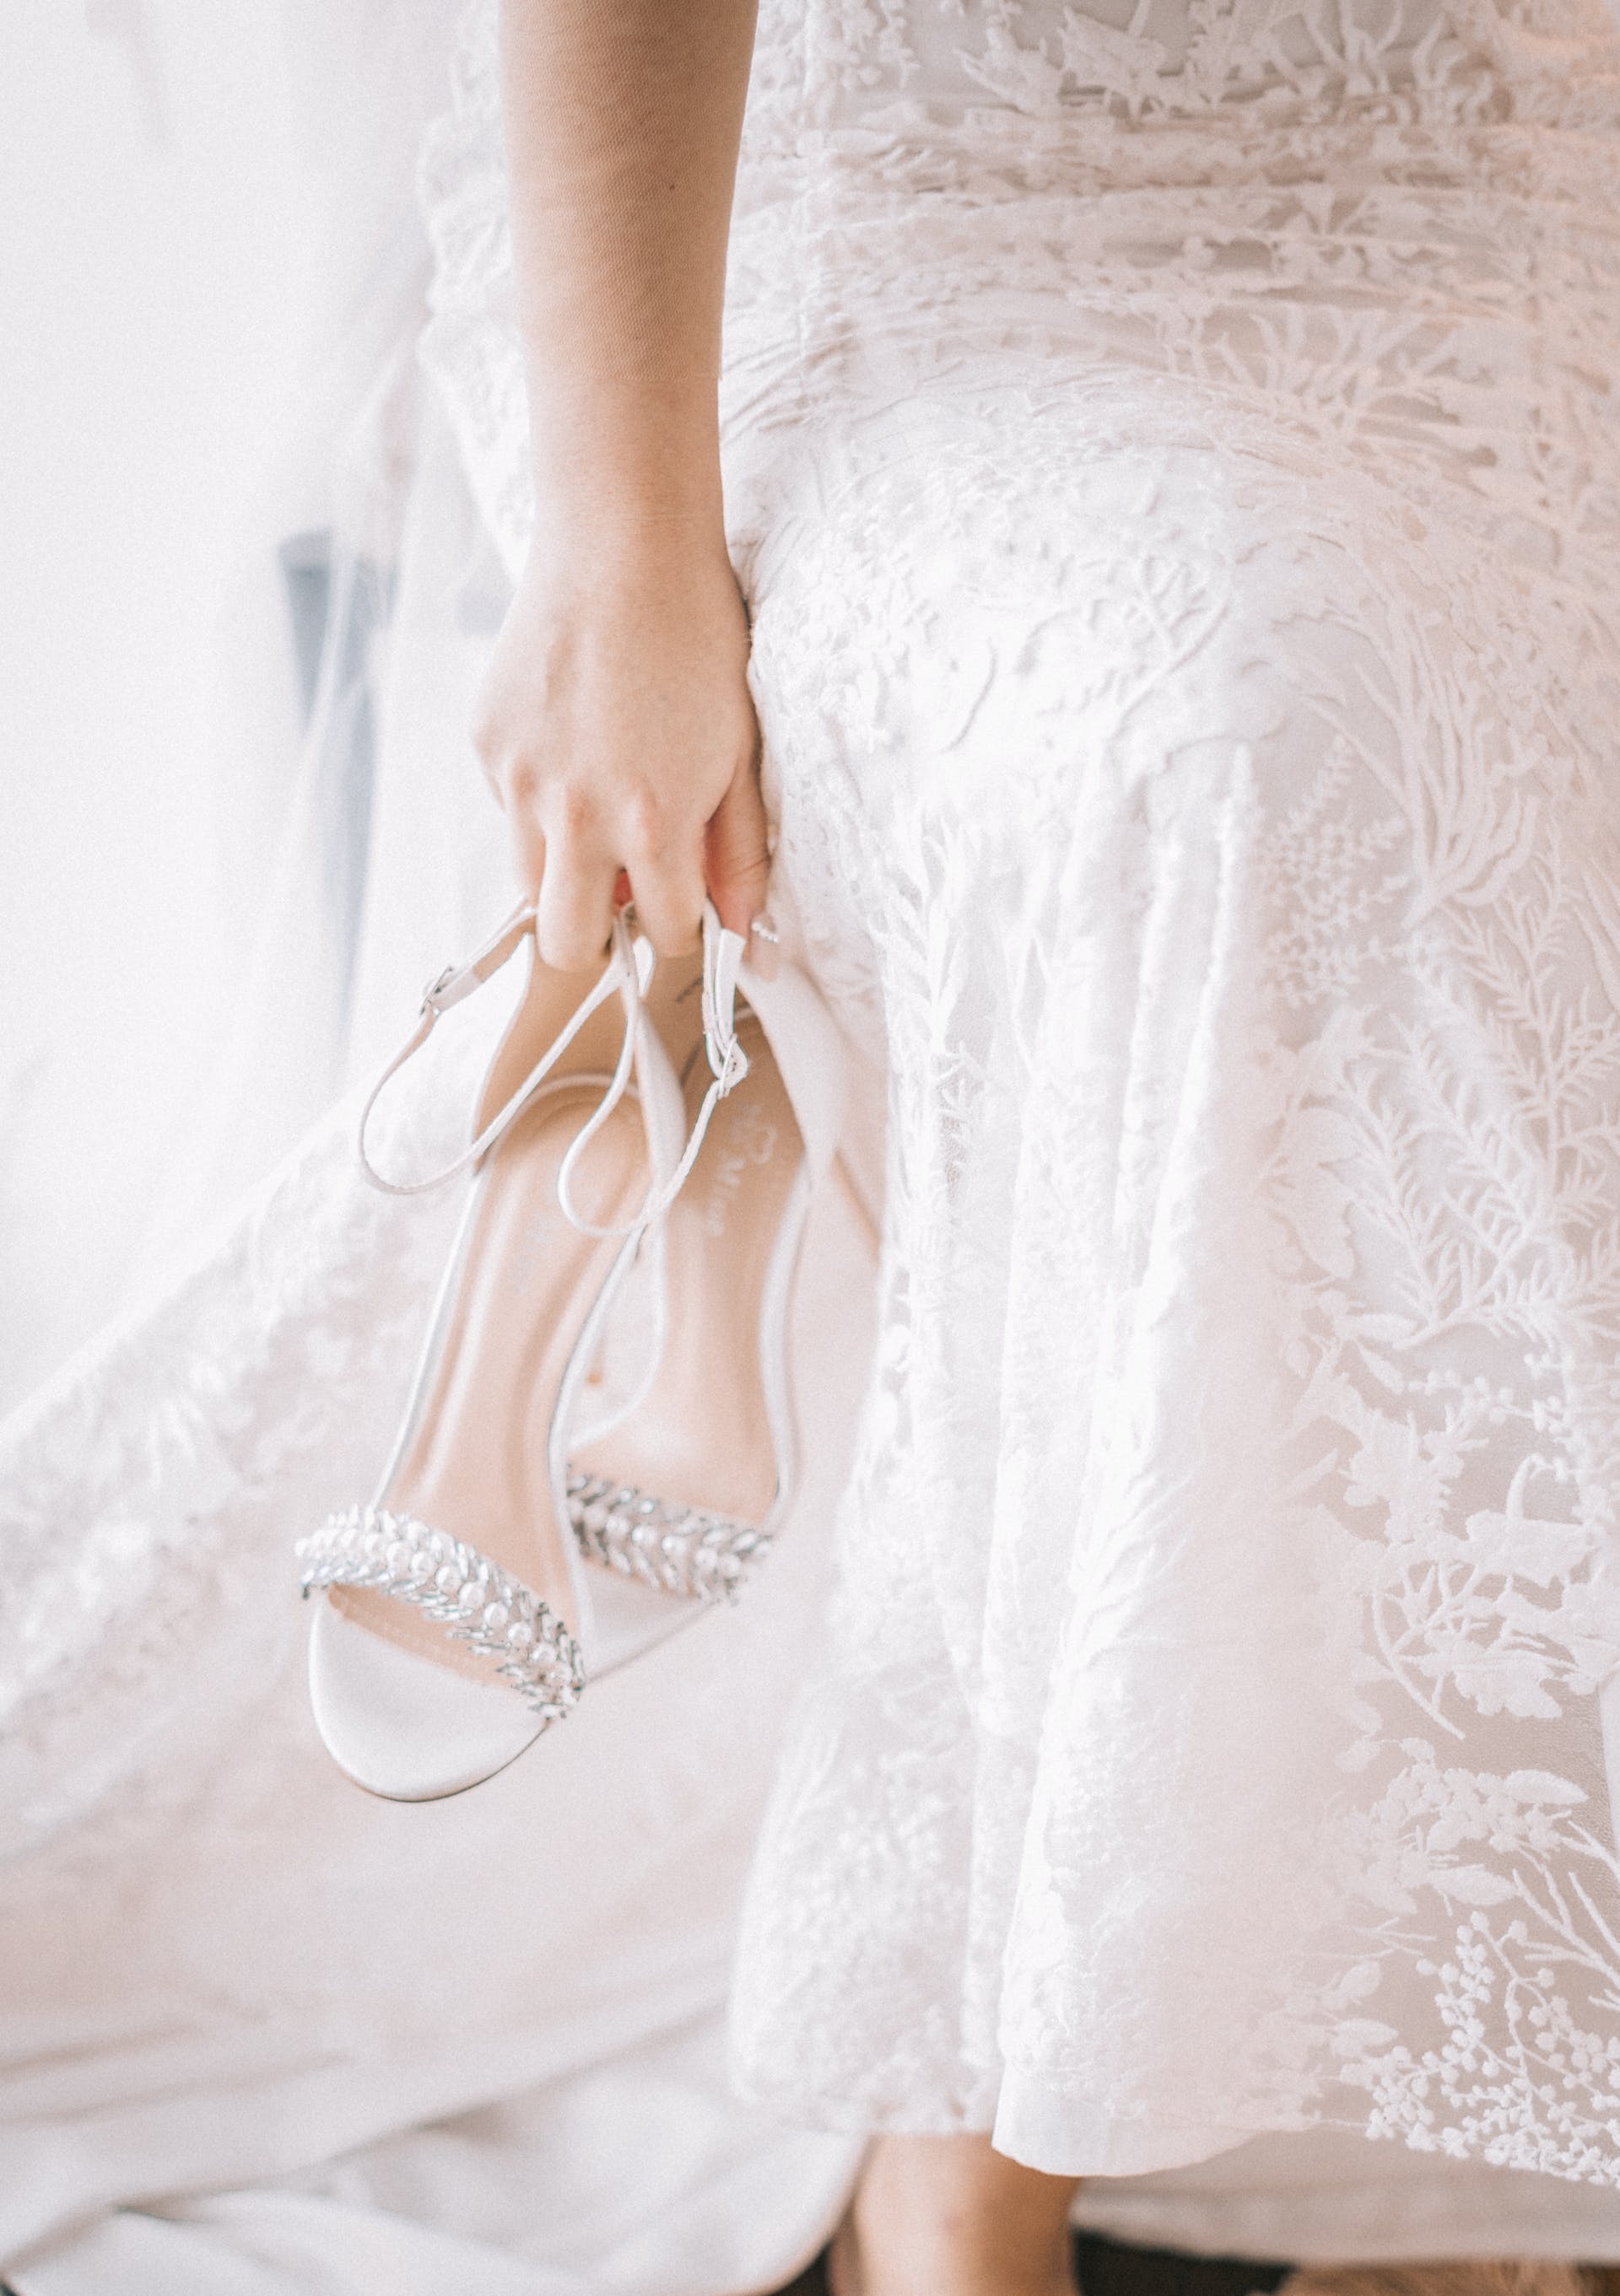 Bride holding her shoes | Source: Pexels